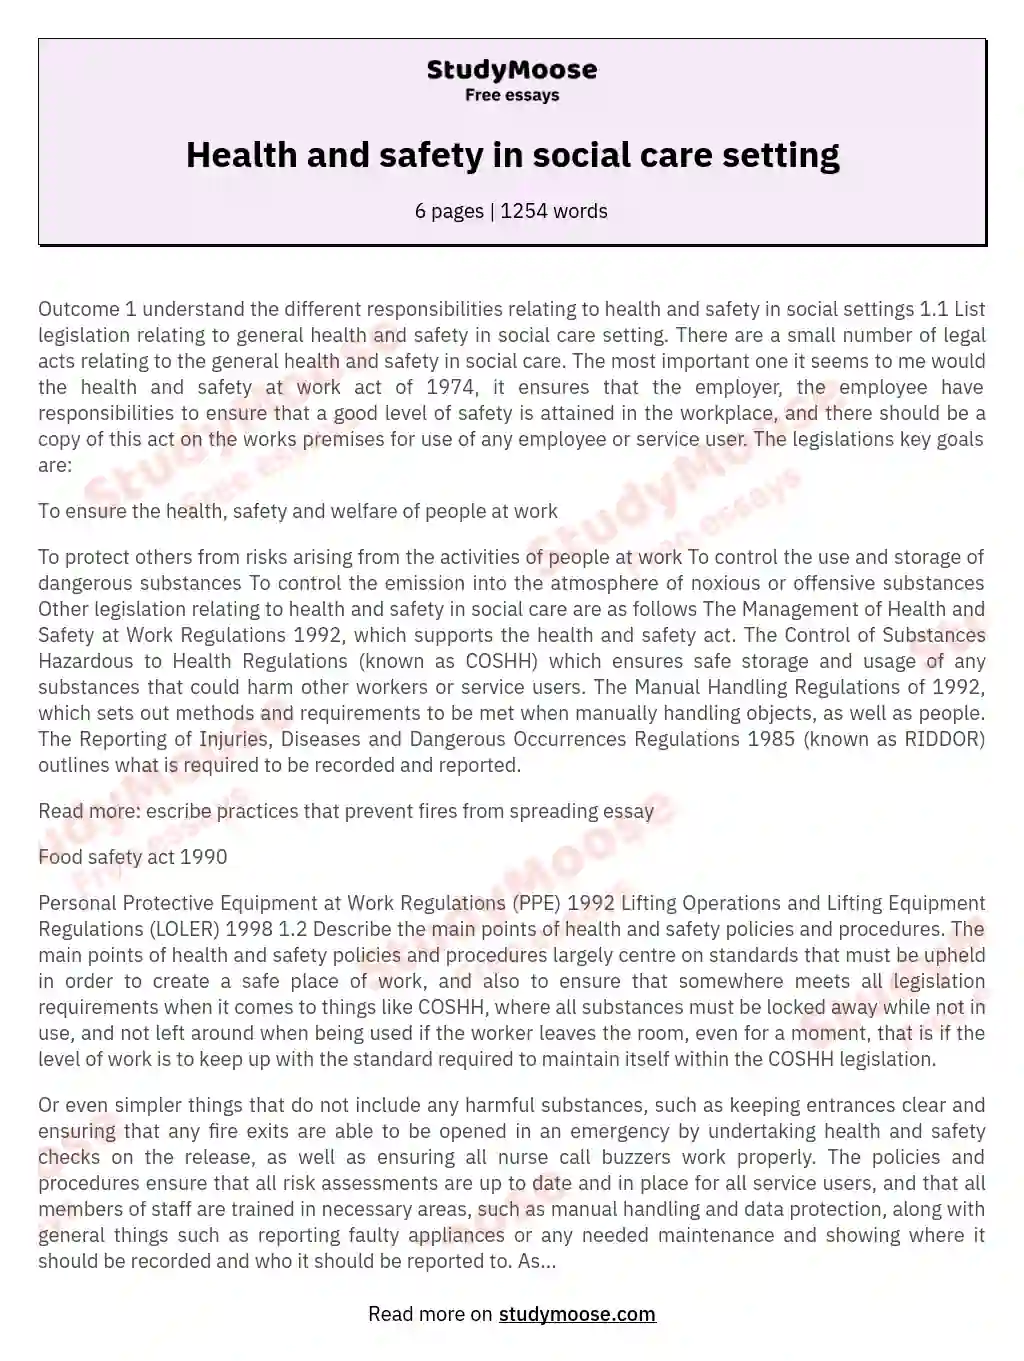 Health and safety in social care setting essay